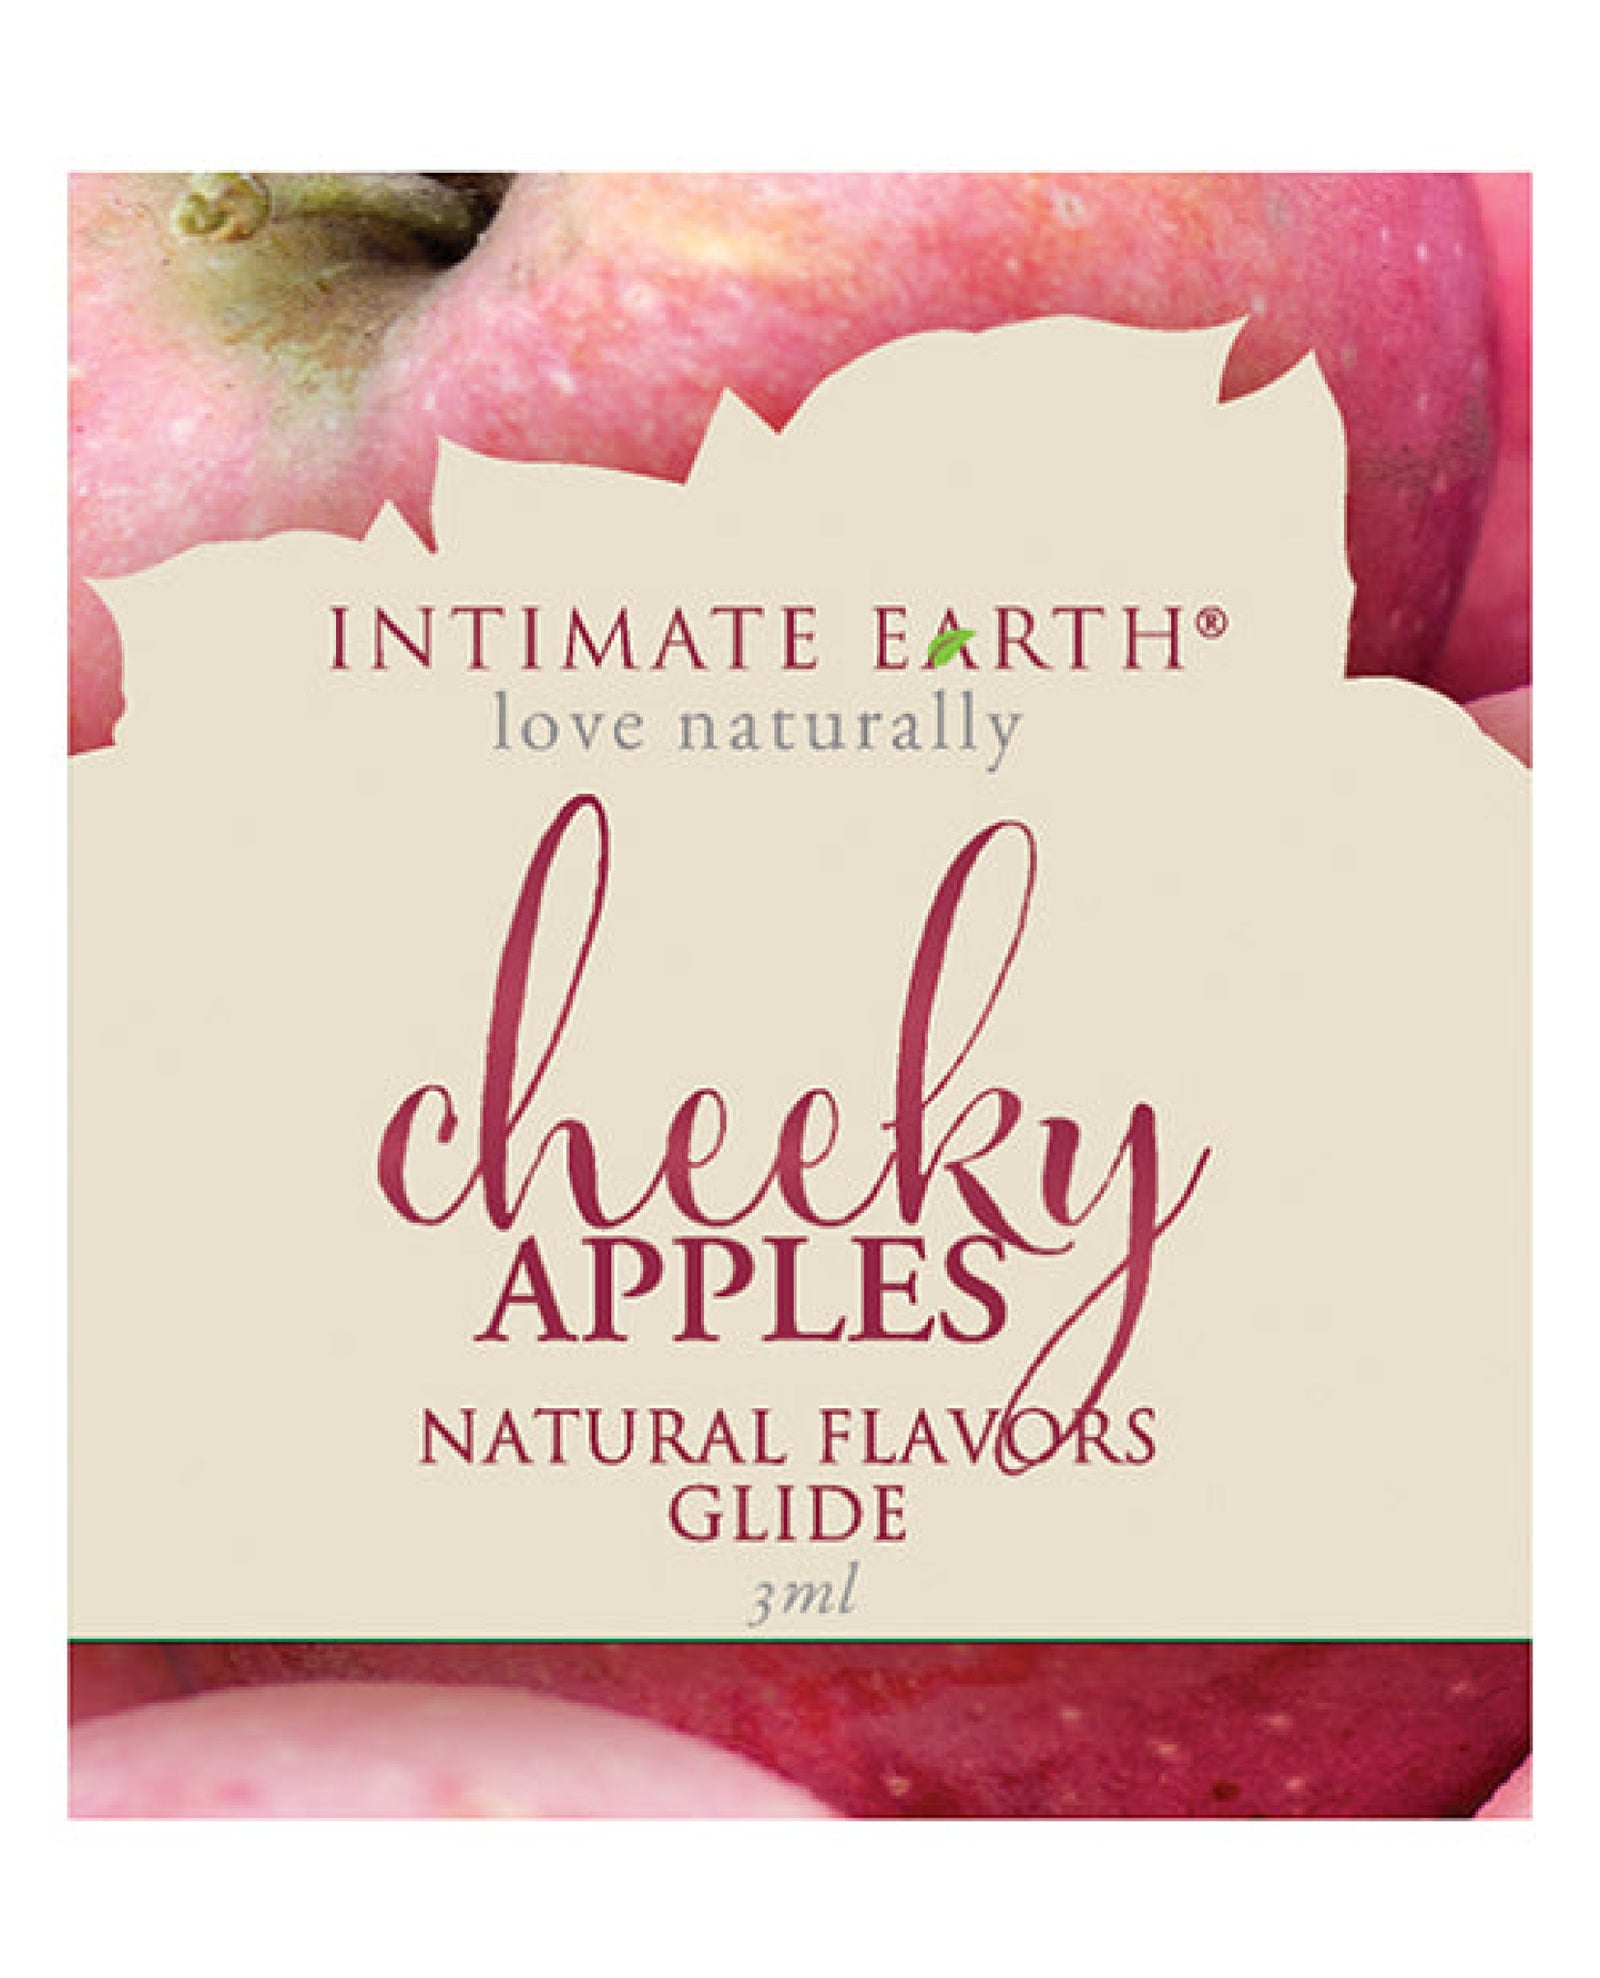 Intimate Earth Oil Foil - 3ml Cheeky Apples Intimate Earth